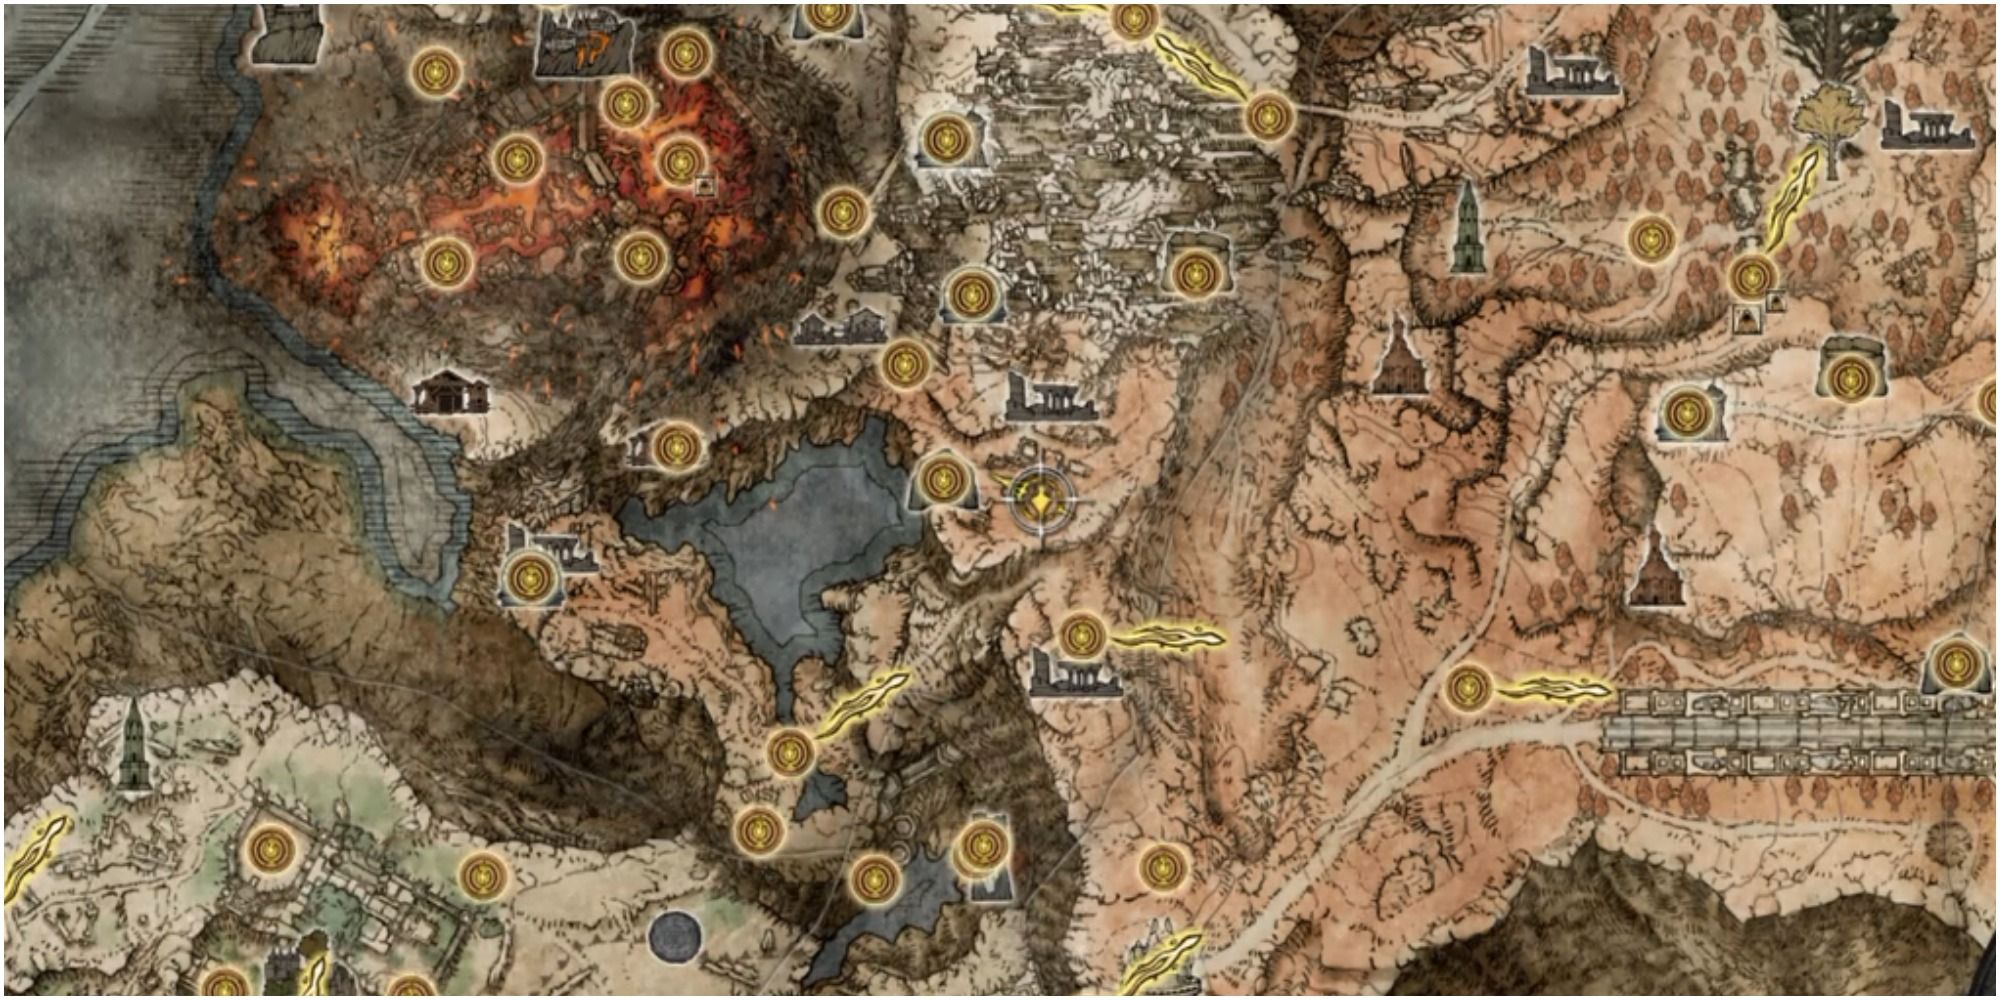 The Map showing the location of Tibia Mariner in Atlas Plateau.